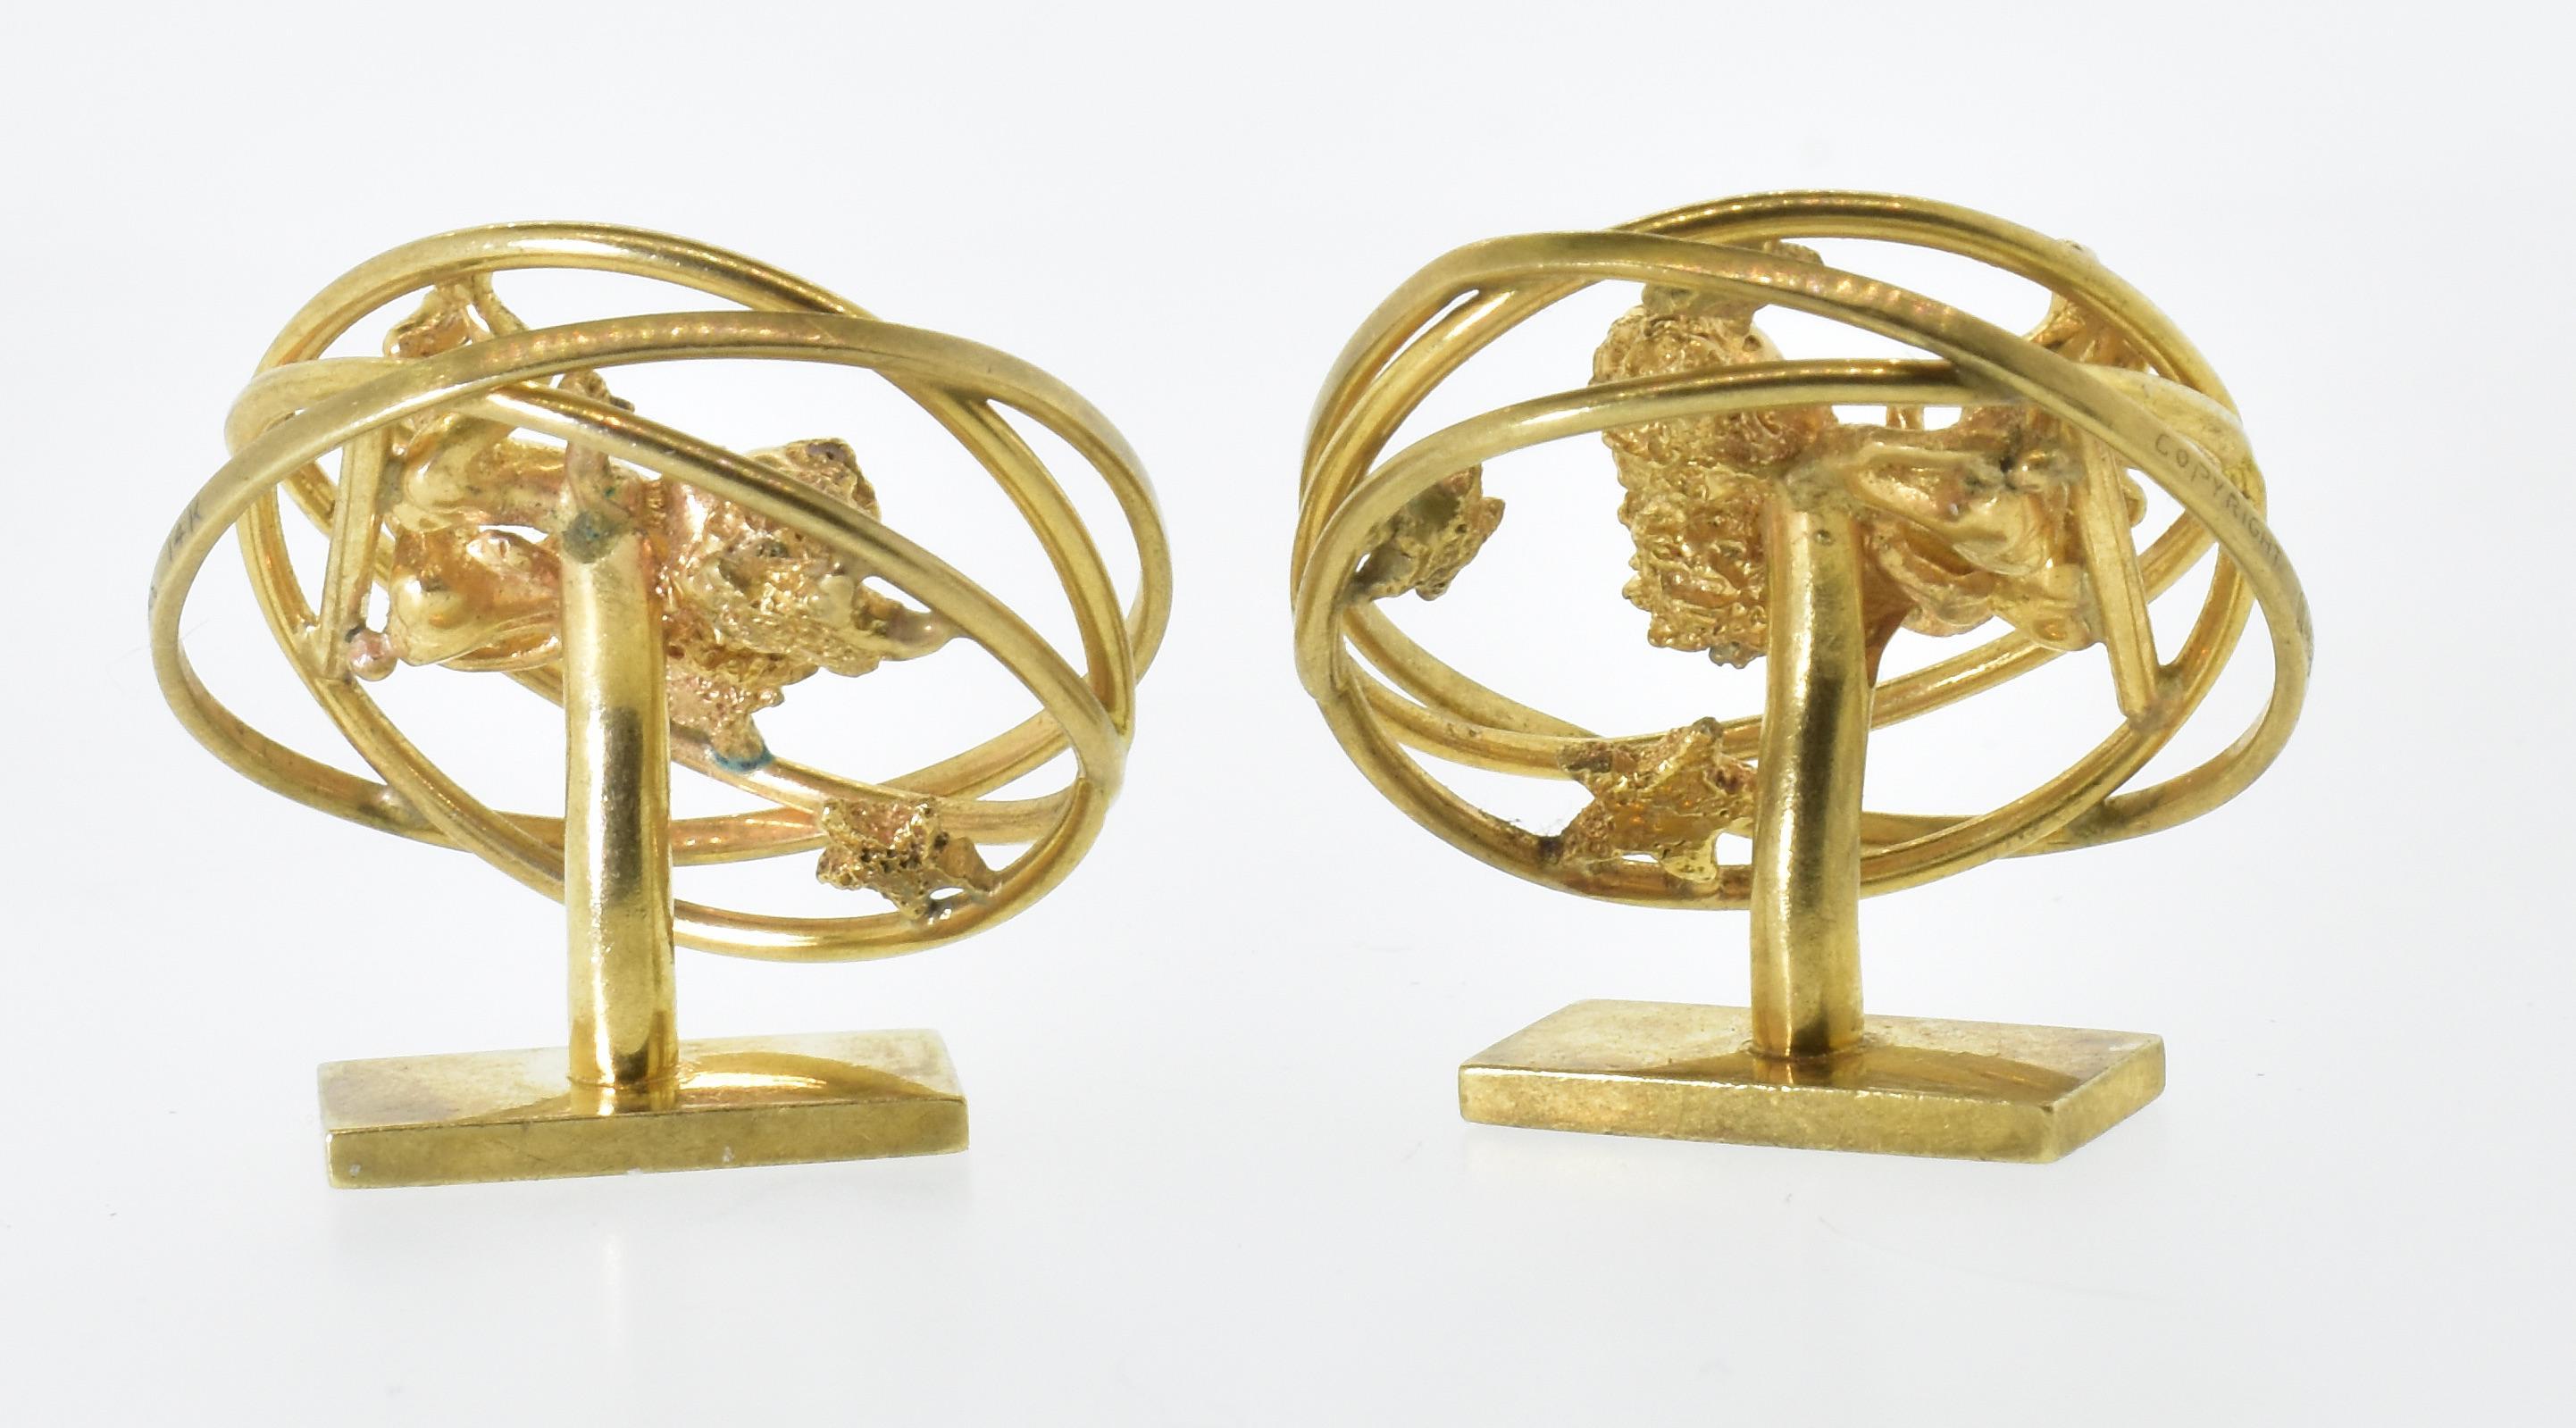 Yellow Gold Amusing Motif Cufflinks by the famous American designer Ruser, 1955 For Sale 2